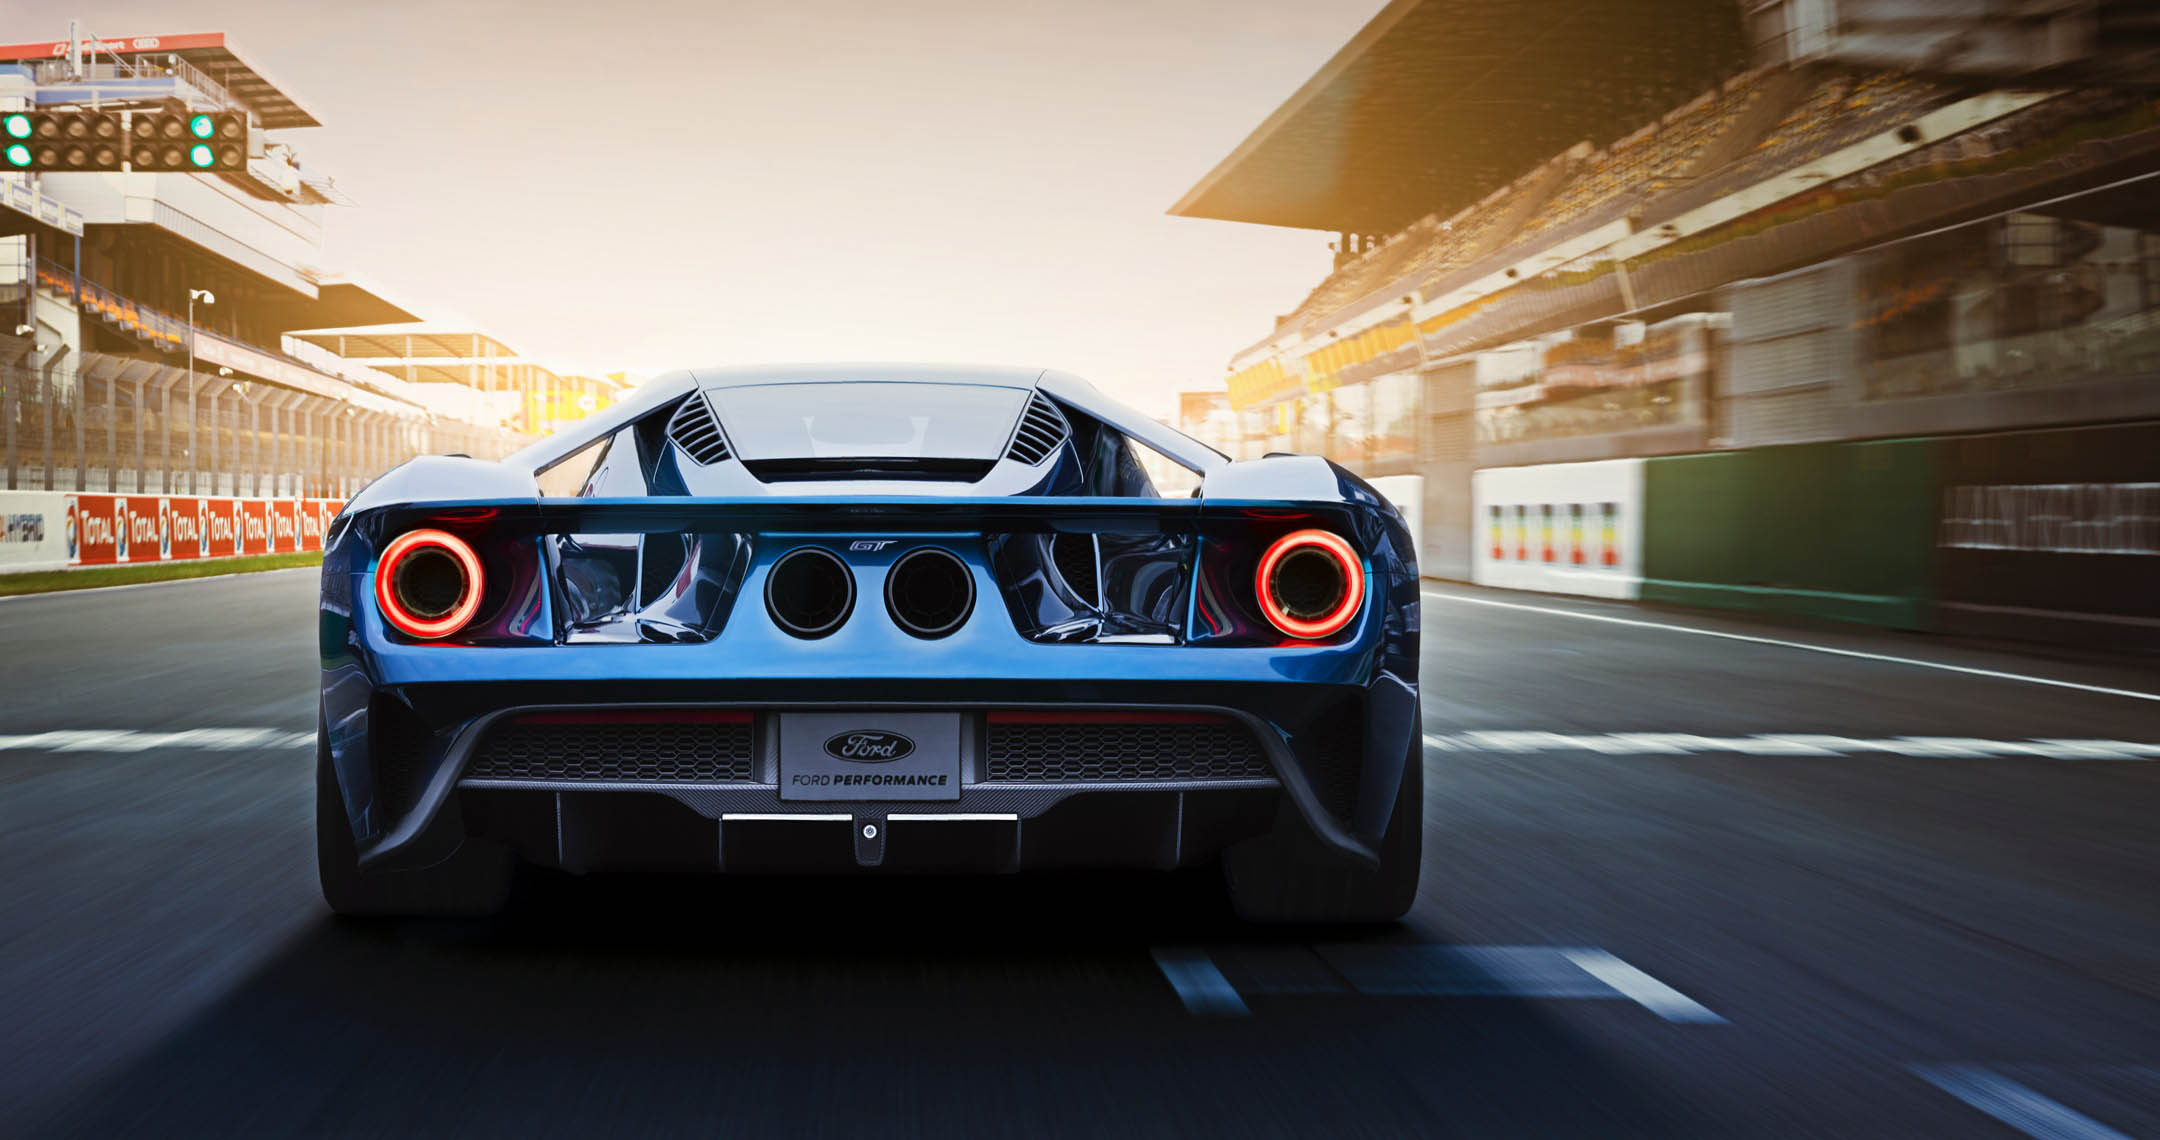 Our Favorite American-Built Supercar Returns - The Ford GT